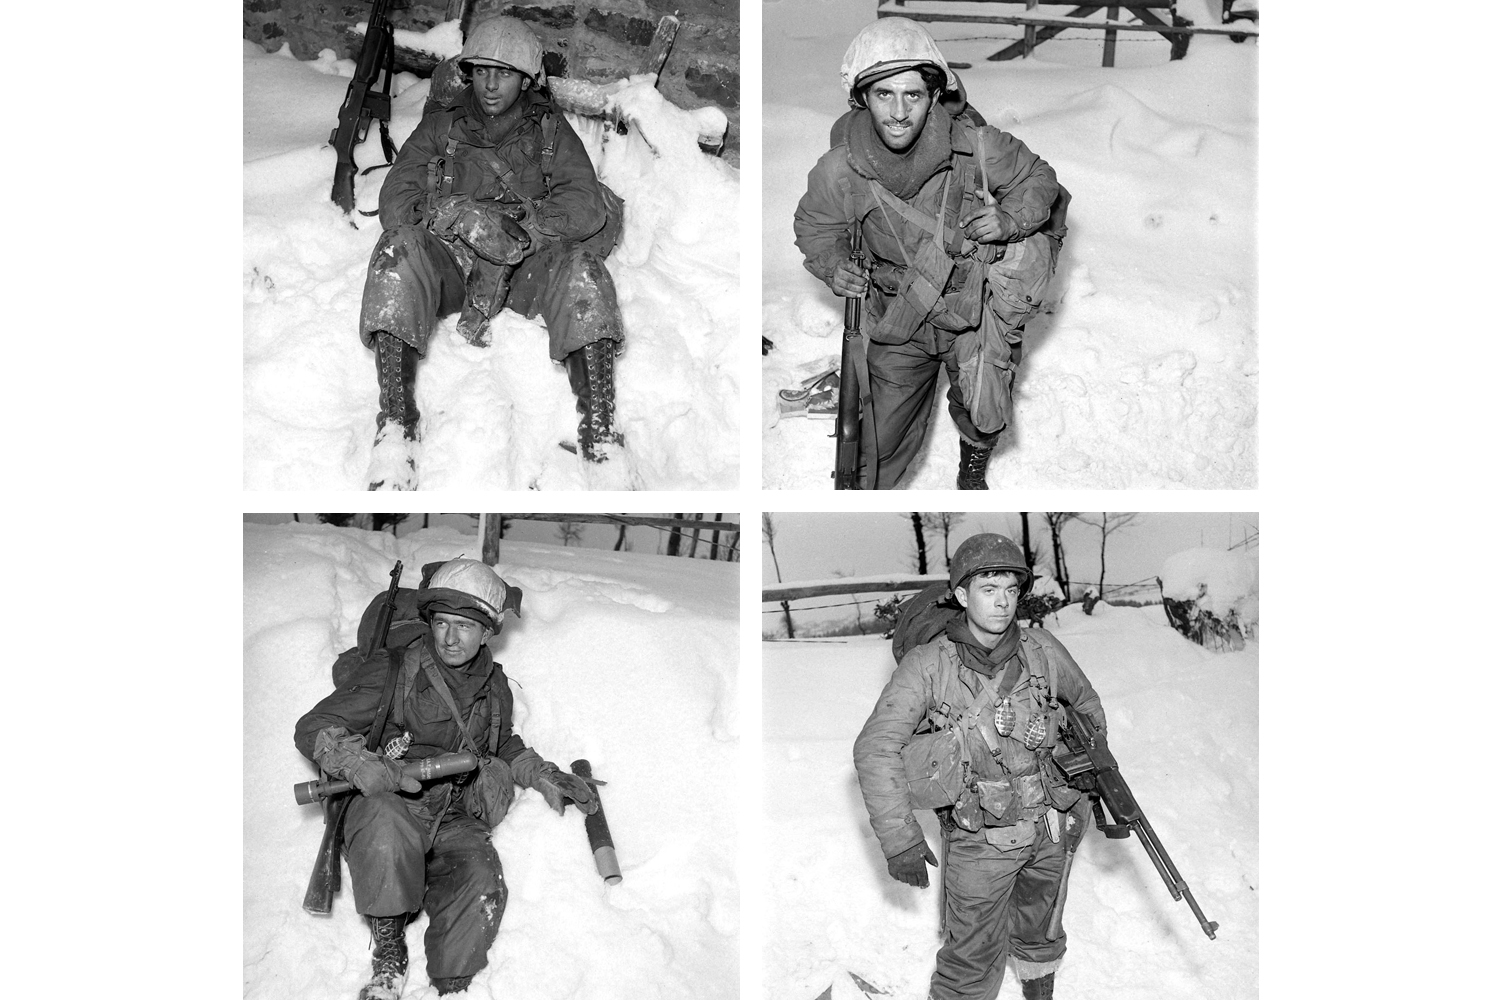 Previously unpublished portraits of American soldiers during the Battle of the Bulge, December 1944.